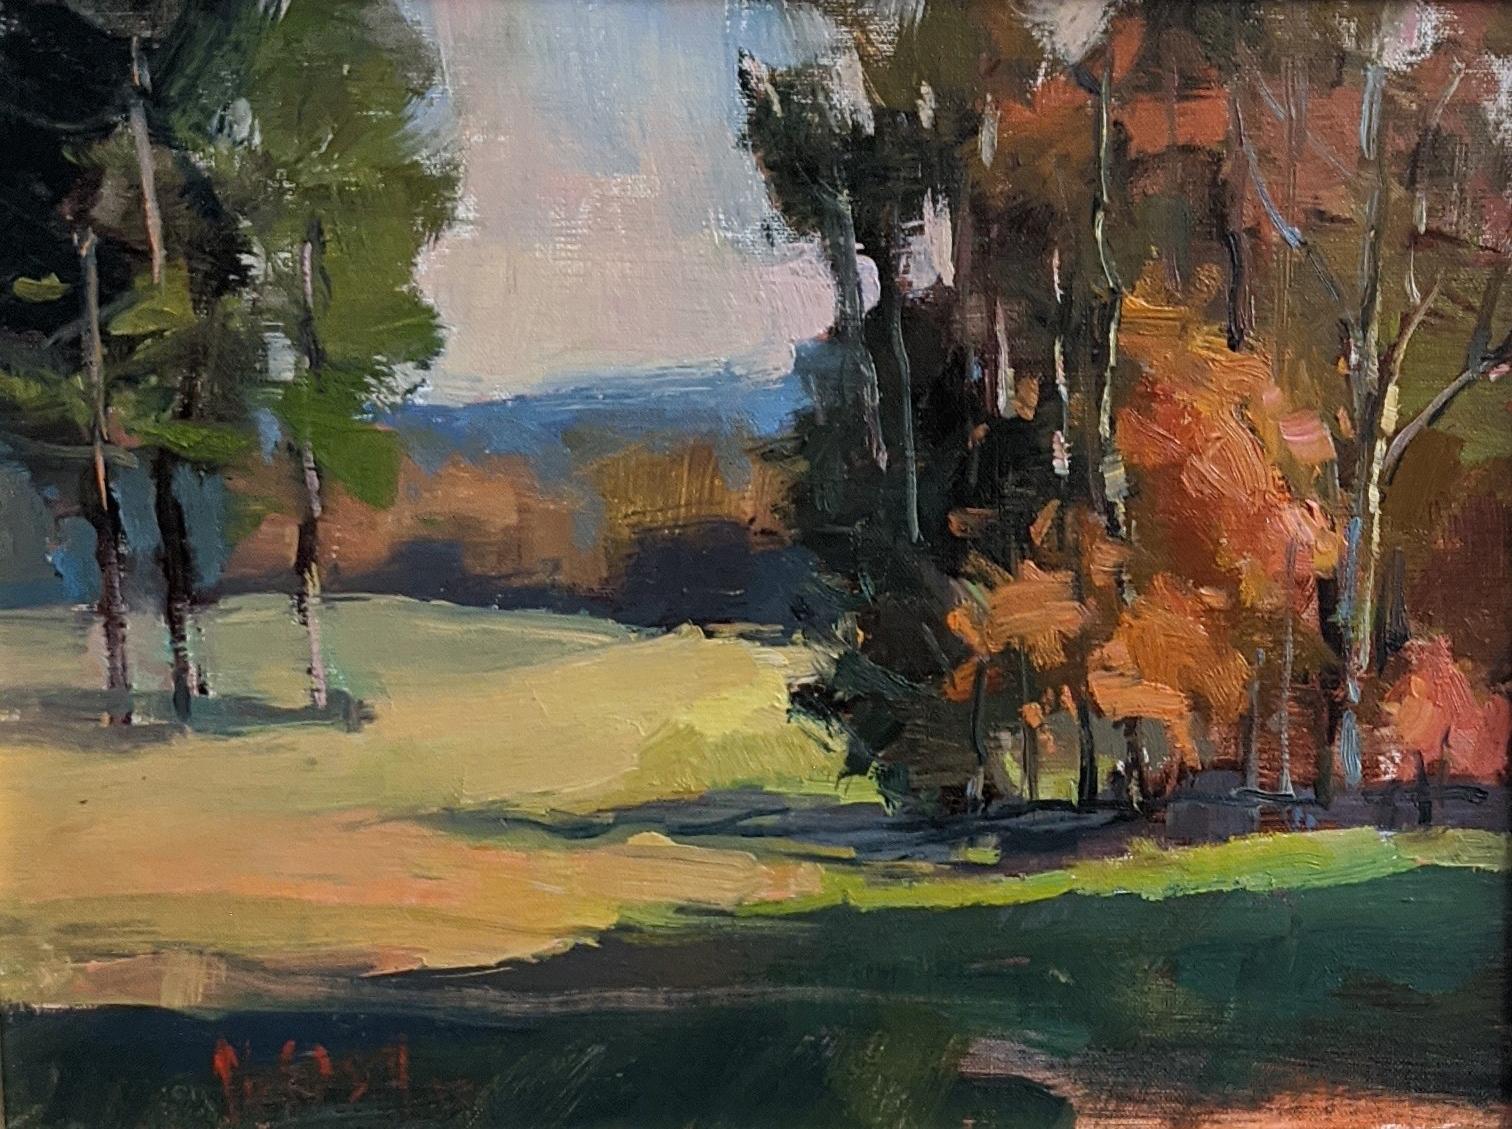 'Back and Forth' is a framed Impressionist oil on canvas plein-air landscape painting created by American artist Millie Gosch in 2020. Featuring a palette mostly made of green, brown, pink, purple, orange and blue tones, the painting depicts a dirt